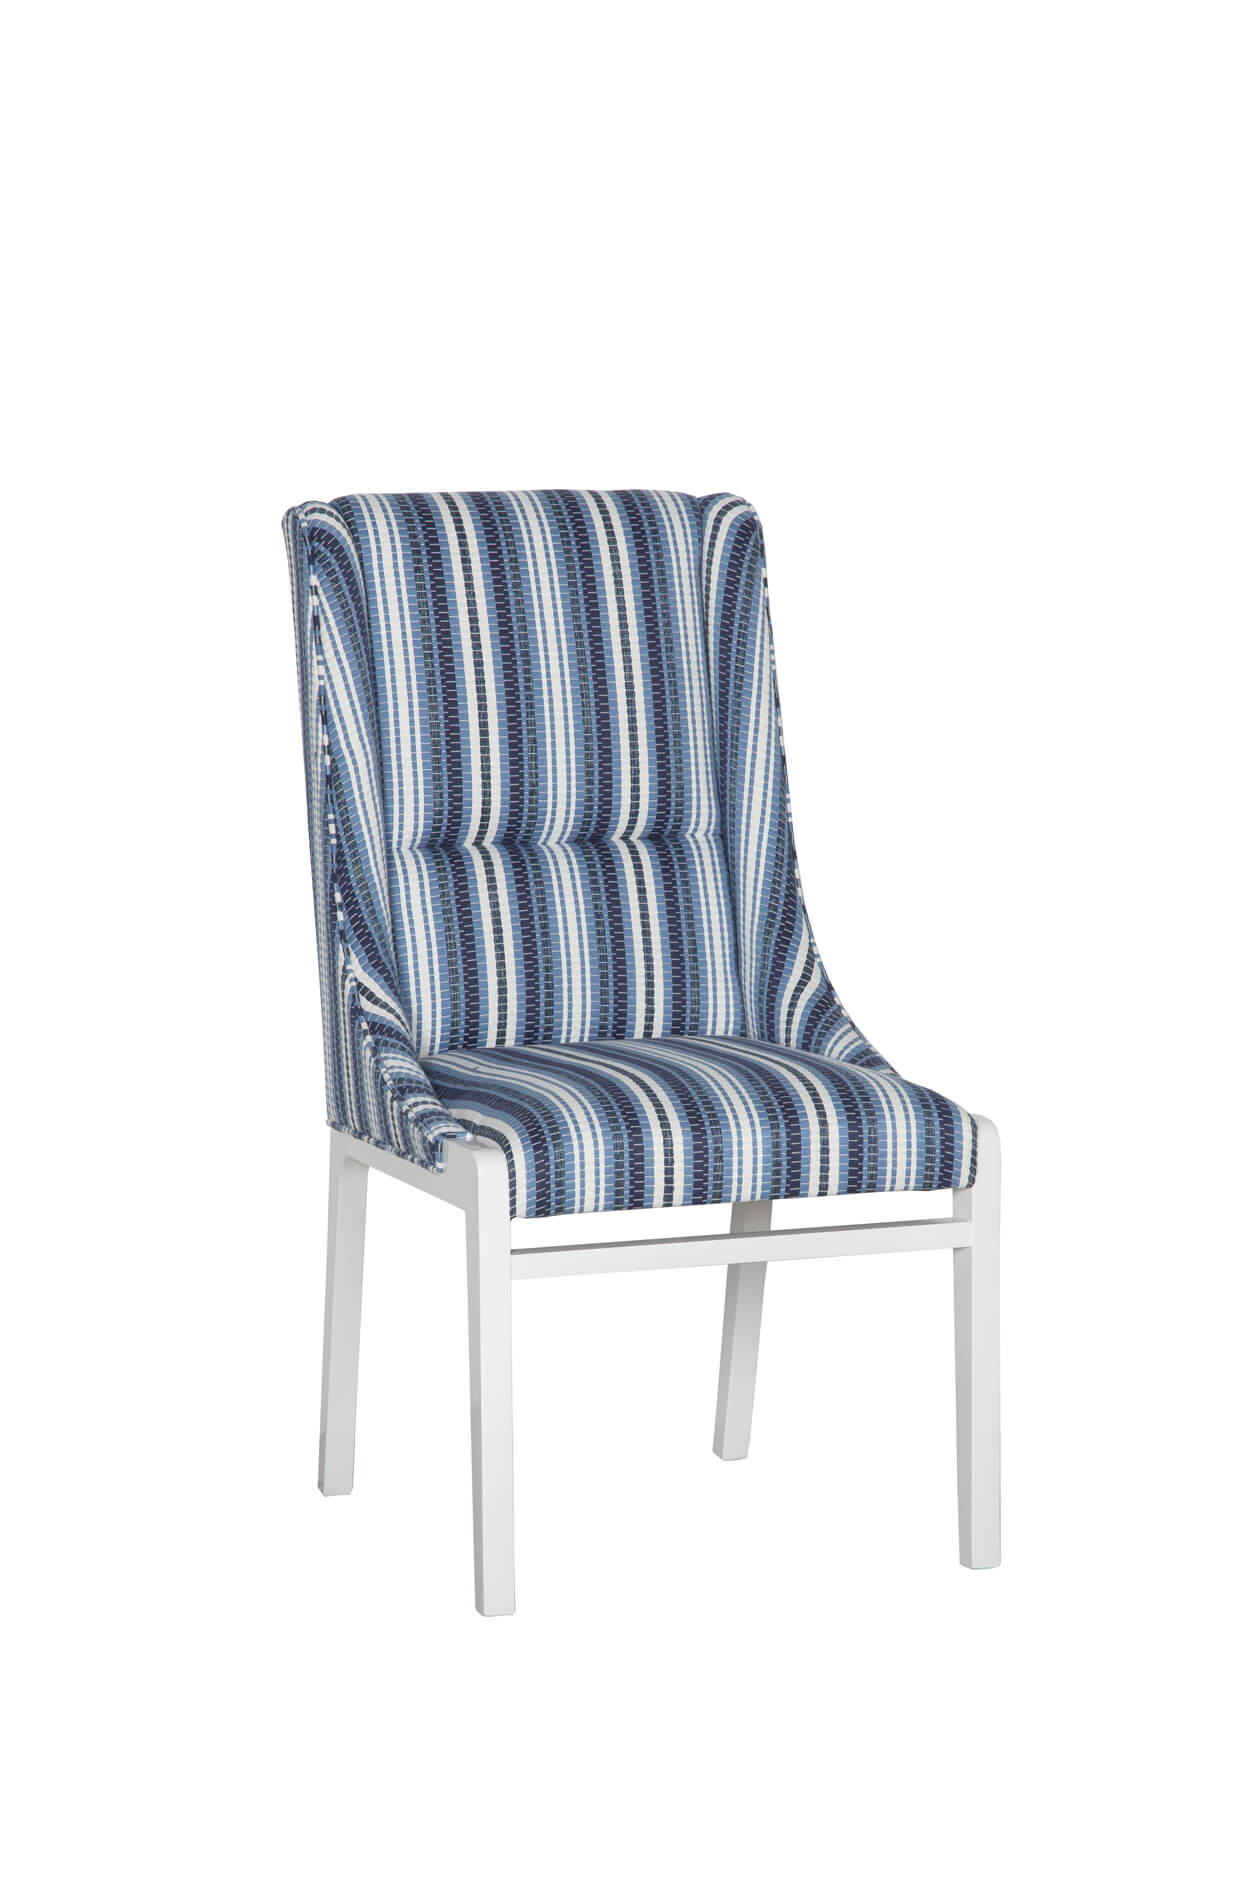 Briarcroft Upholstered Dining Chair